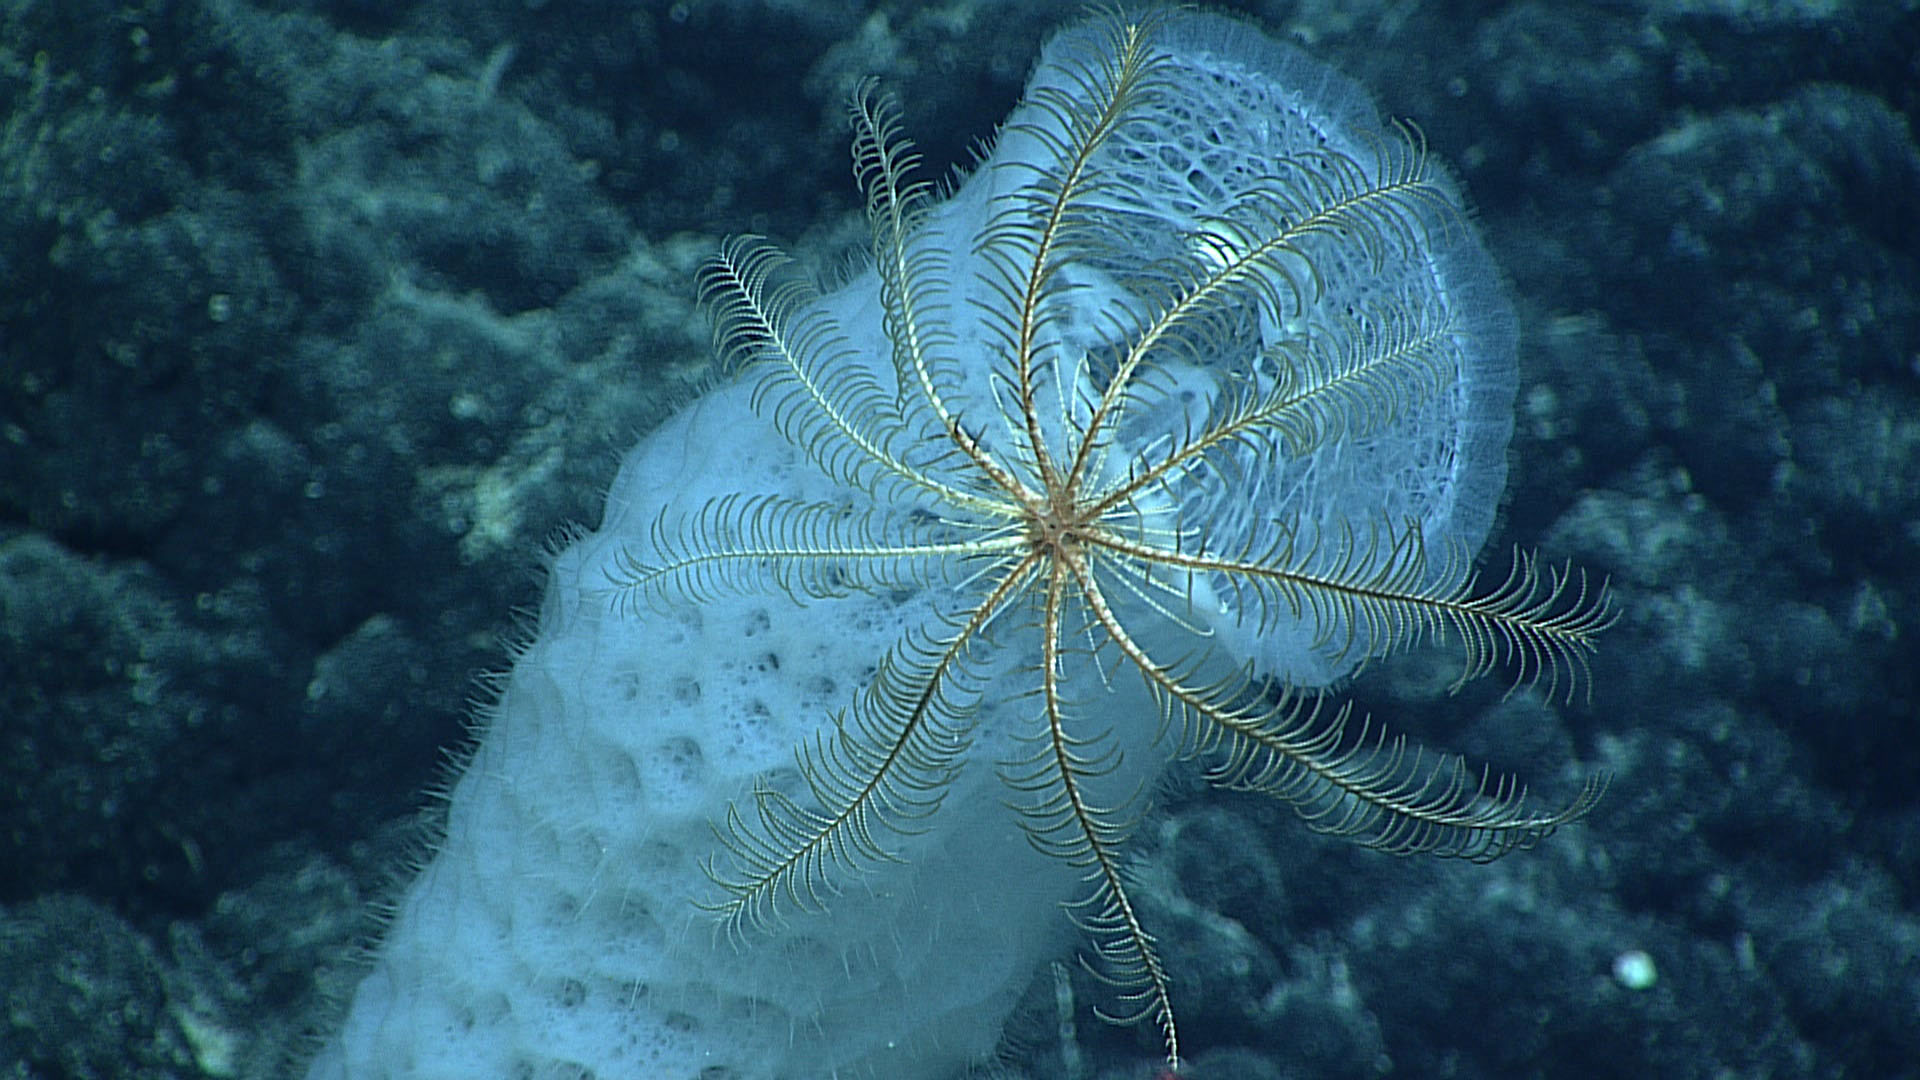 A crinoid perched on a glass sponge, seen at a depth of 2,240 meters (1.5 miles) during the first dive to ever explore within the Wake Atoll Unit of the Pacific Remote Marine National Monument.